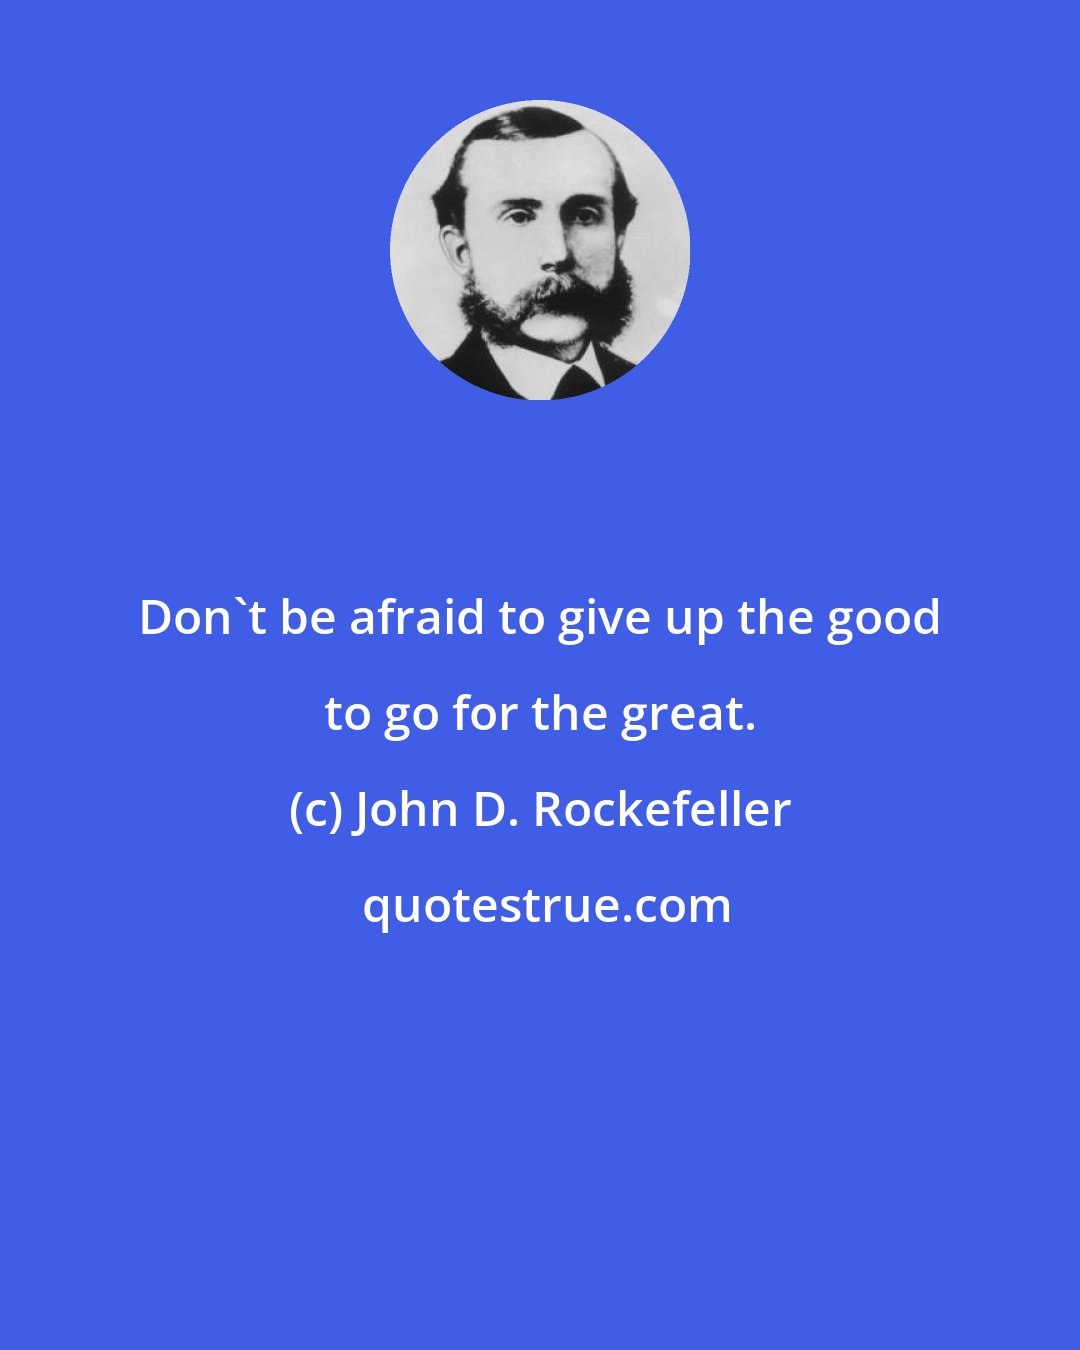 John D. Rockefeller: Don't be afraid to give up the good to go for the great.